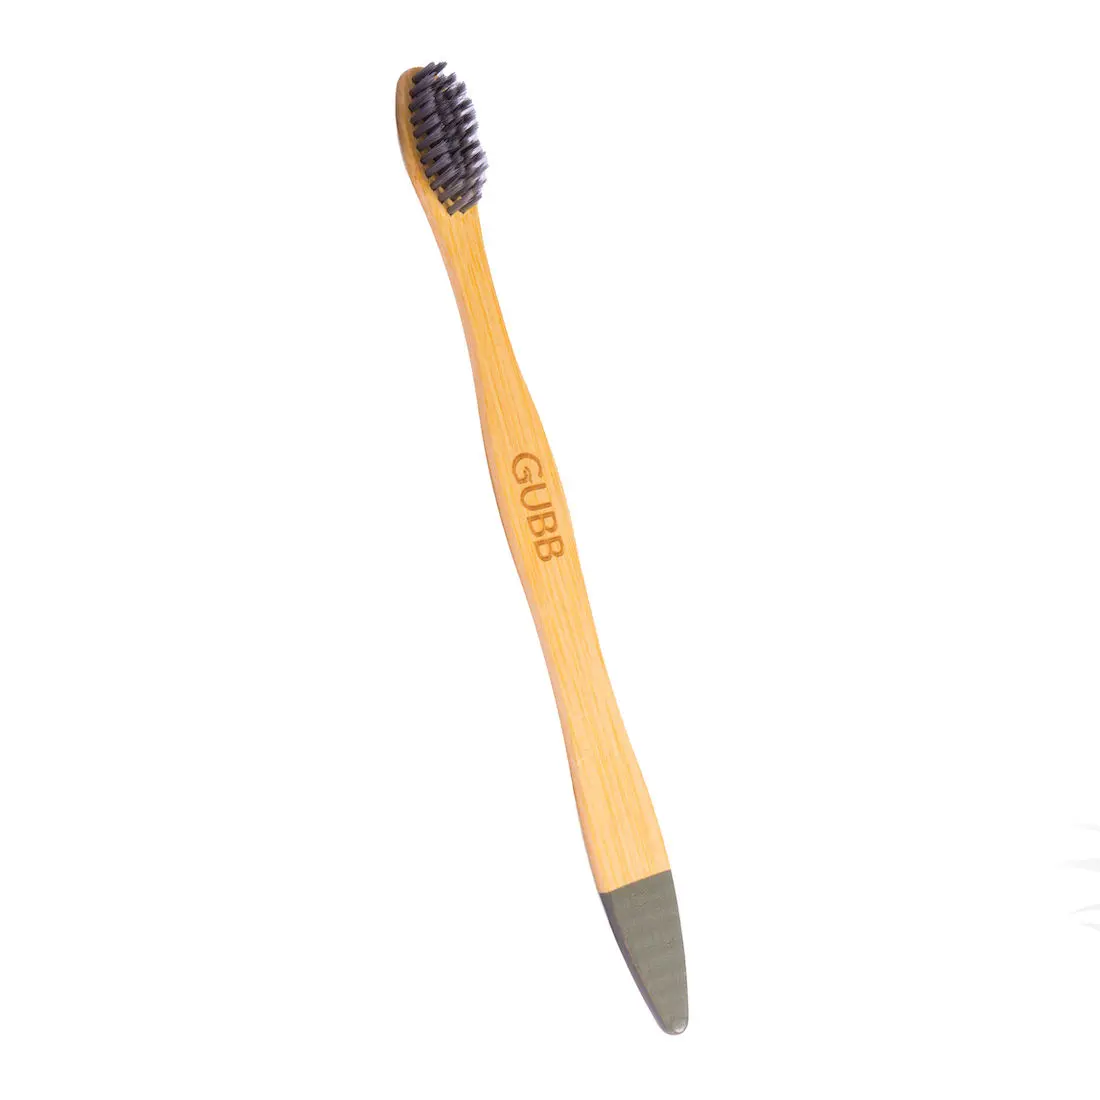 GUBB Organic Bamboo Toothbrush For Adults With Soft Bristles, Eco Friendly, Biodegradable & BPA Free - Charcoal